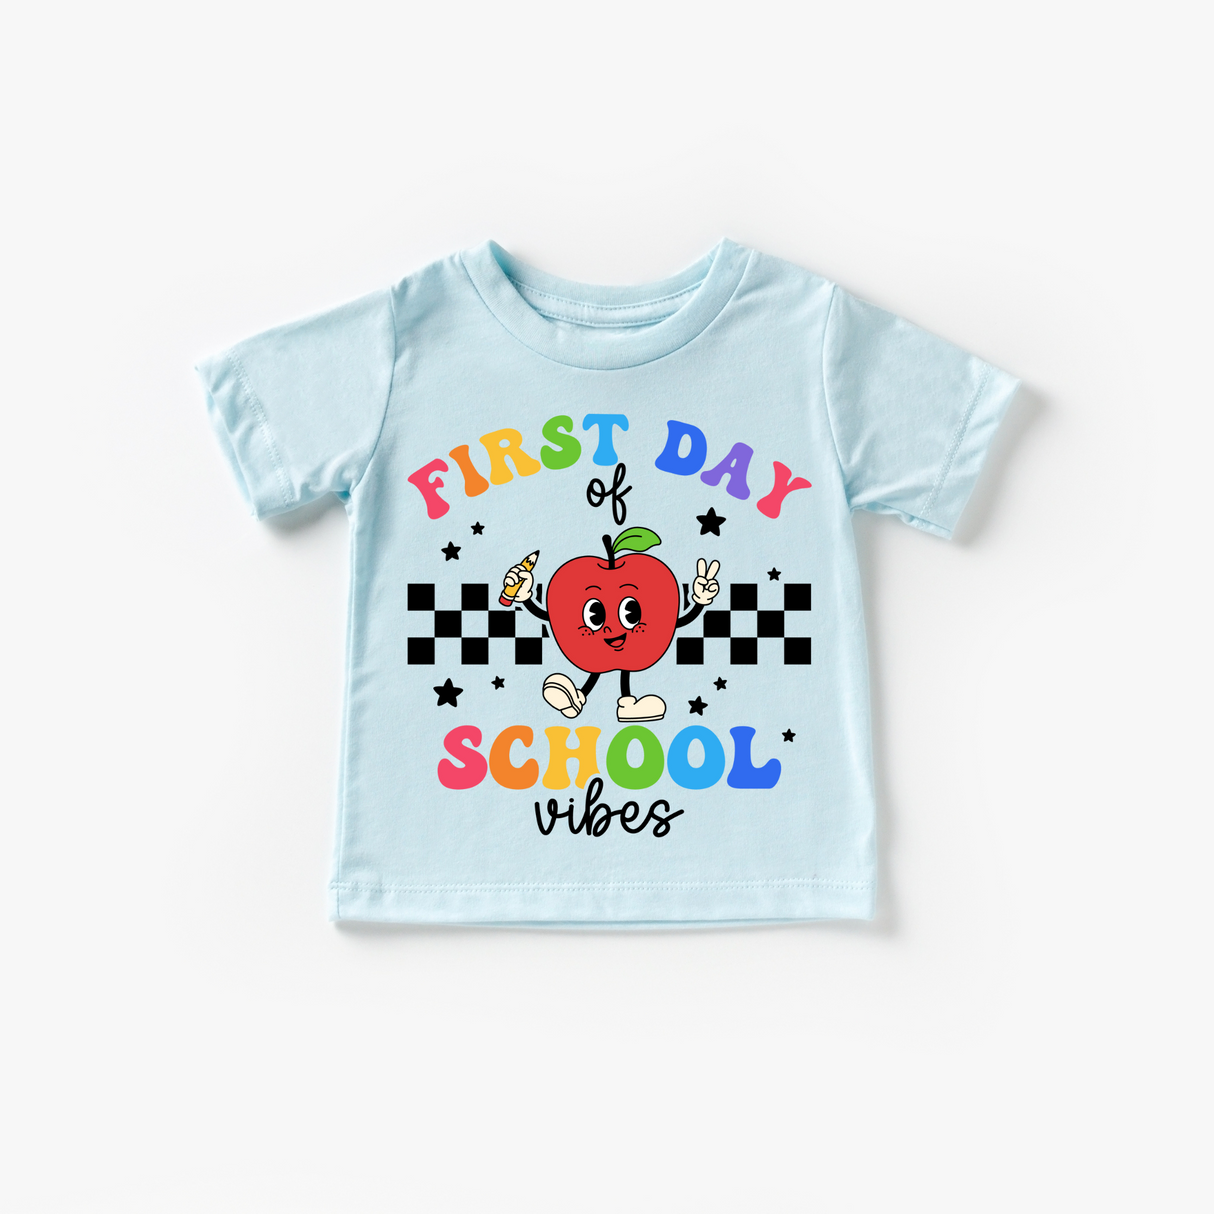 First Day of School Vibes Tee